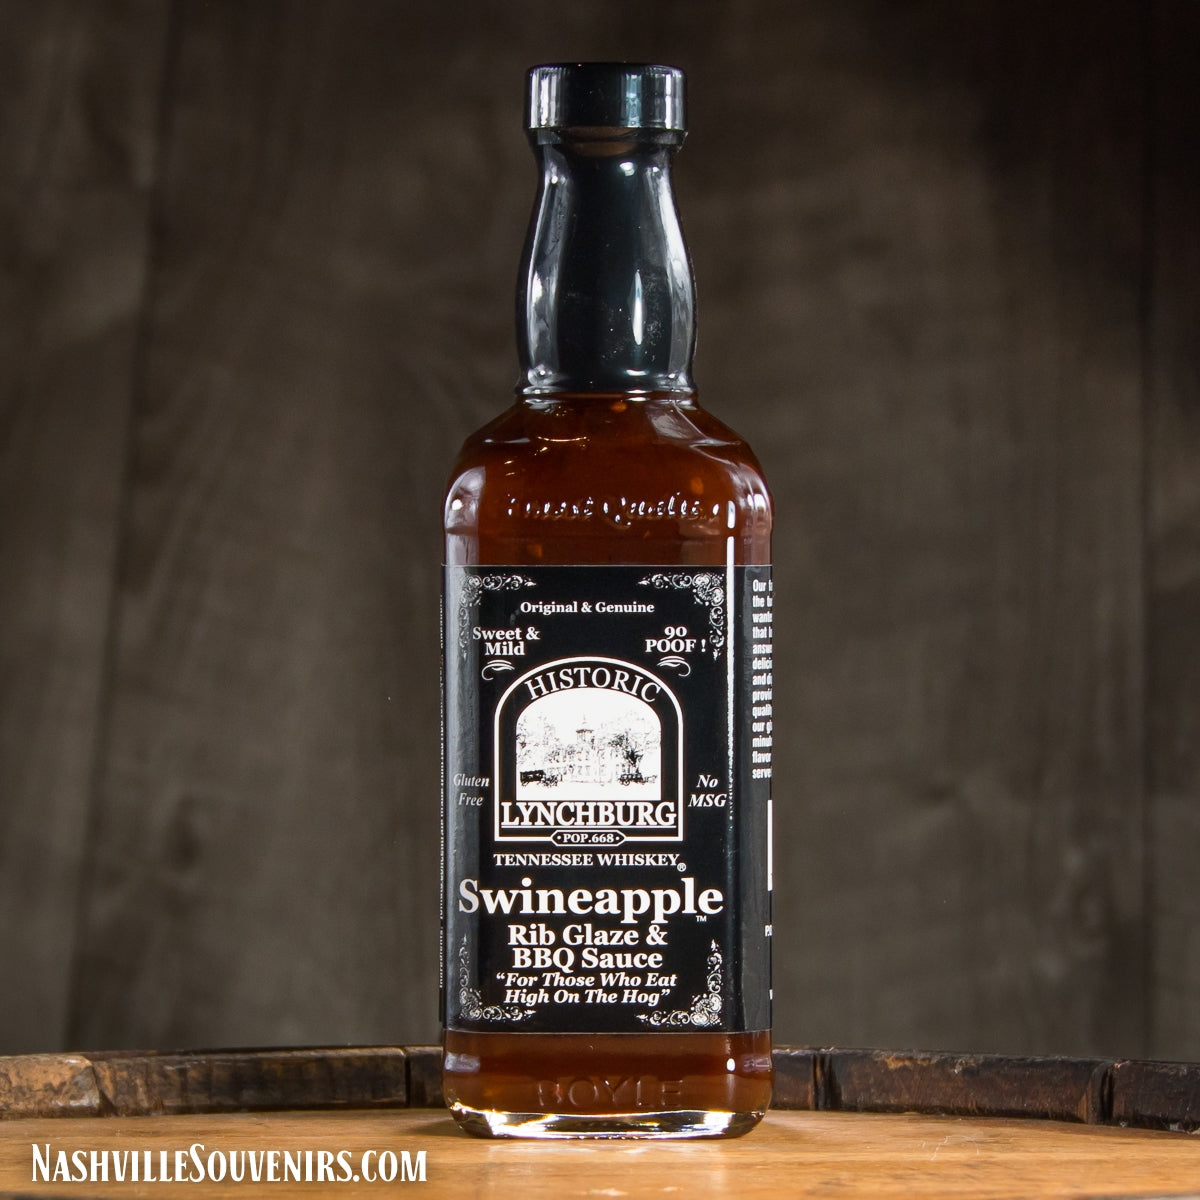 Buy Historic Lynchburg Swineapple sauce containing real Jack Daniels Black Label whiskey. FREE SHIPPING on all US orders over $75!